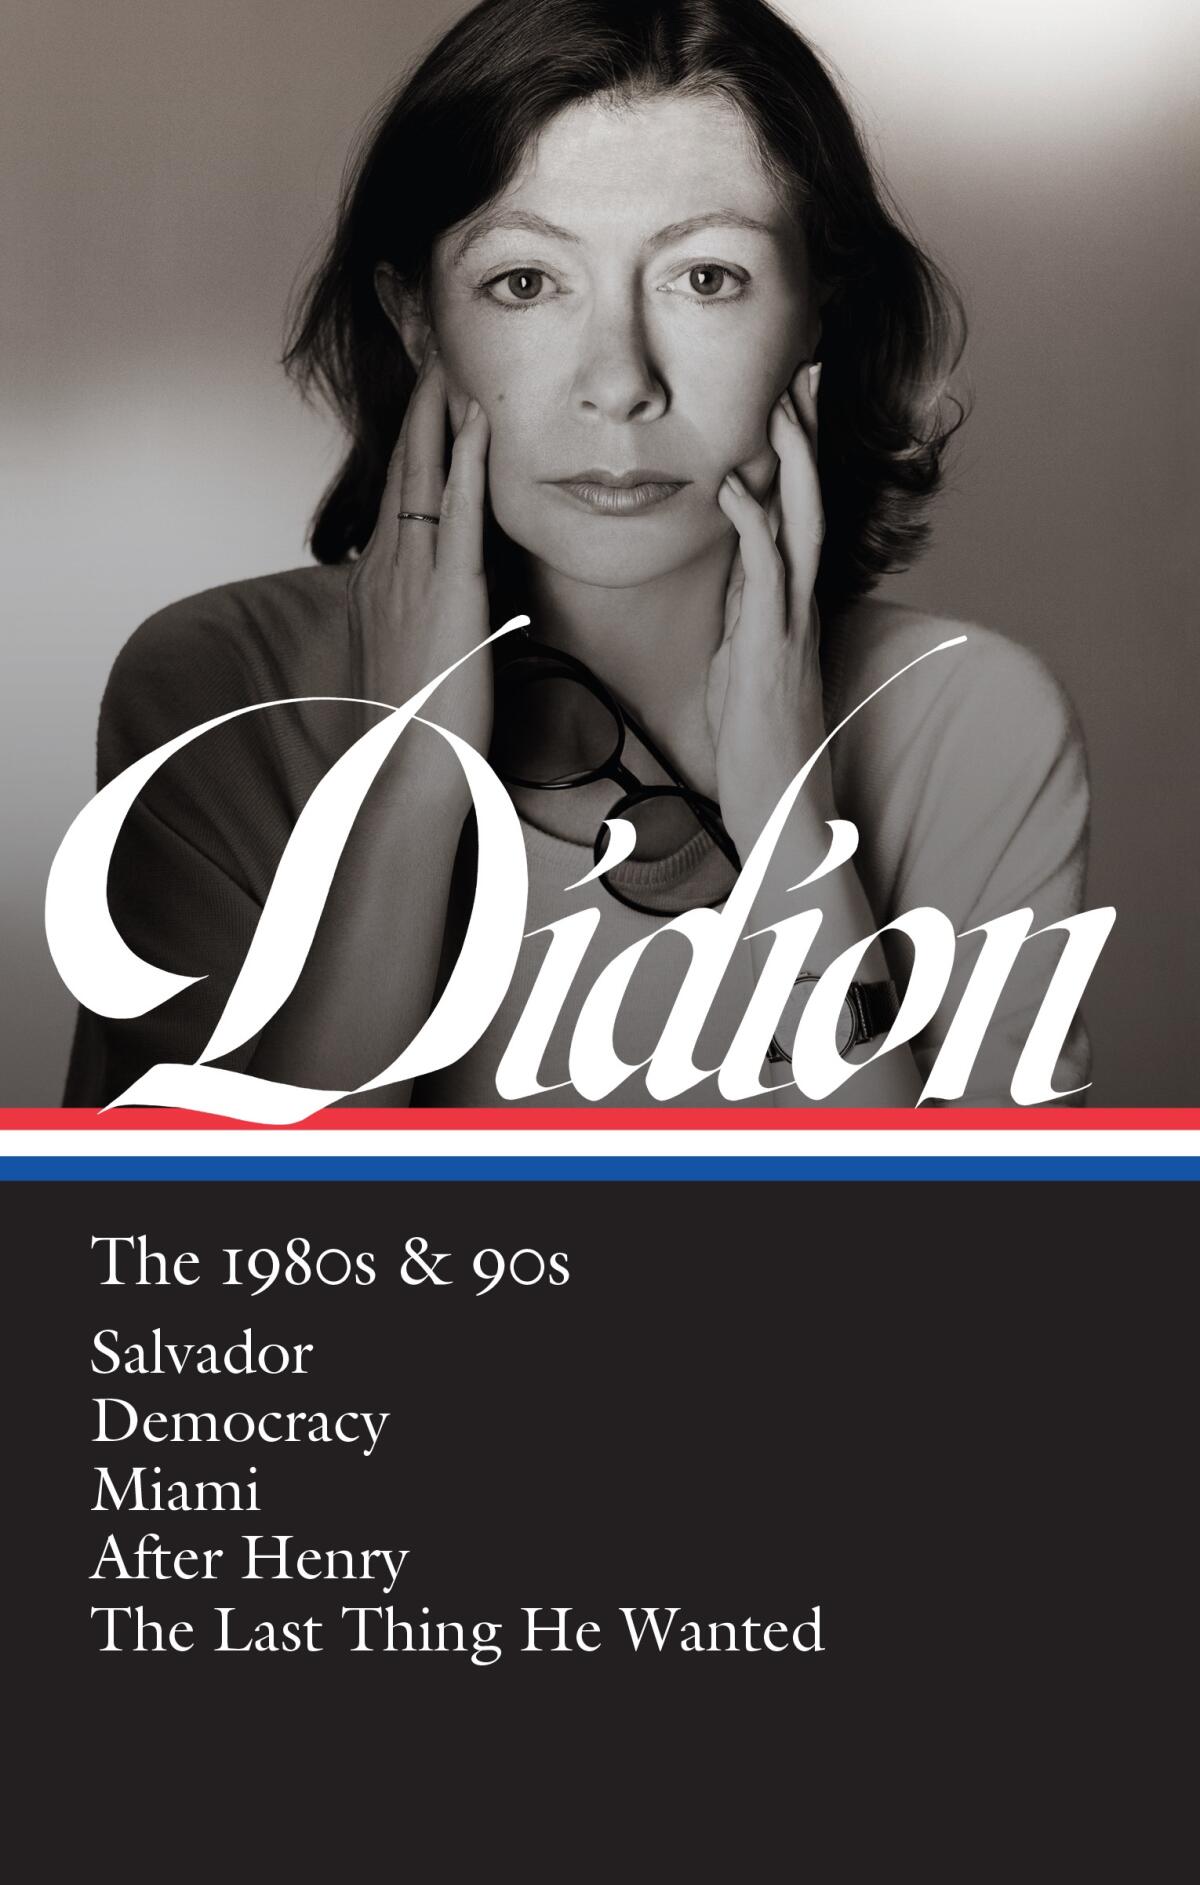 "Didion: The 1980s & 90s," one of two volumes of the Library of America edition edited by David Ulin.